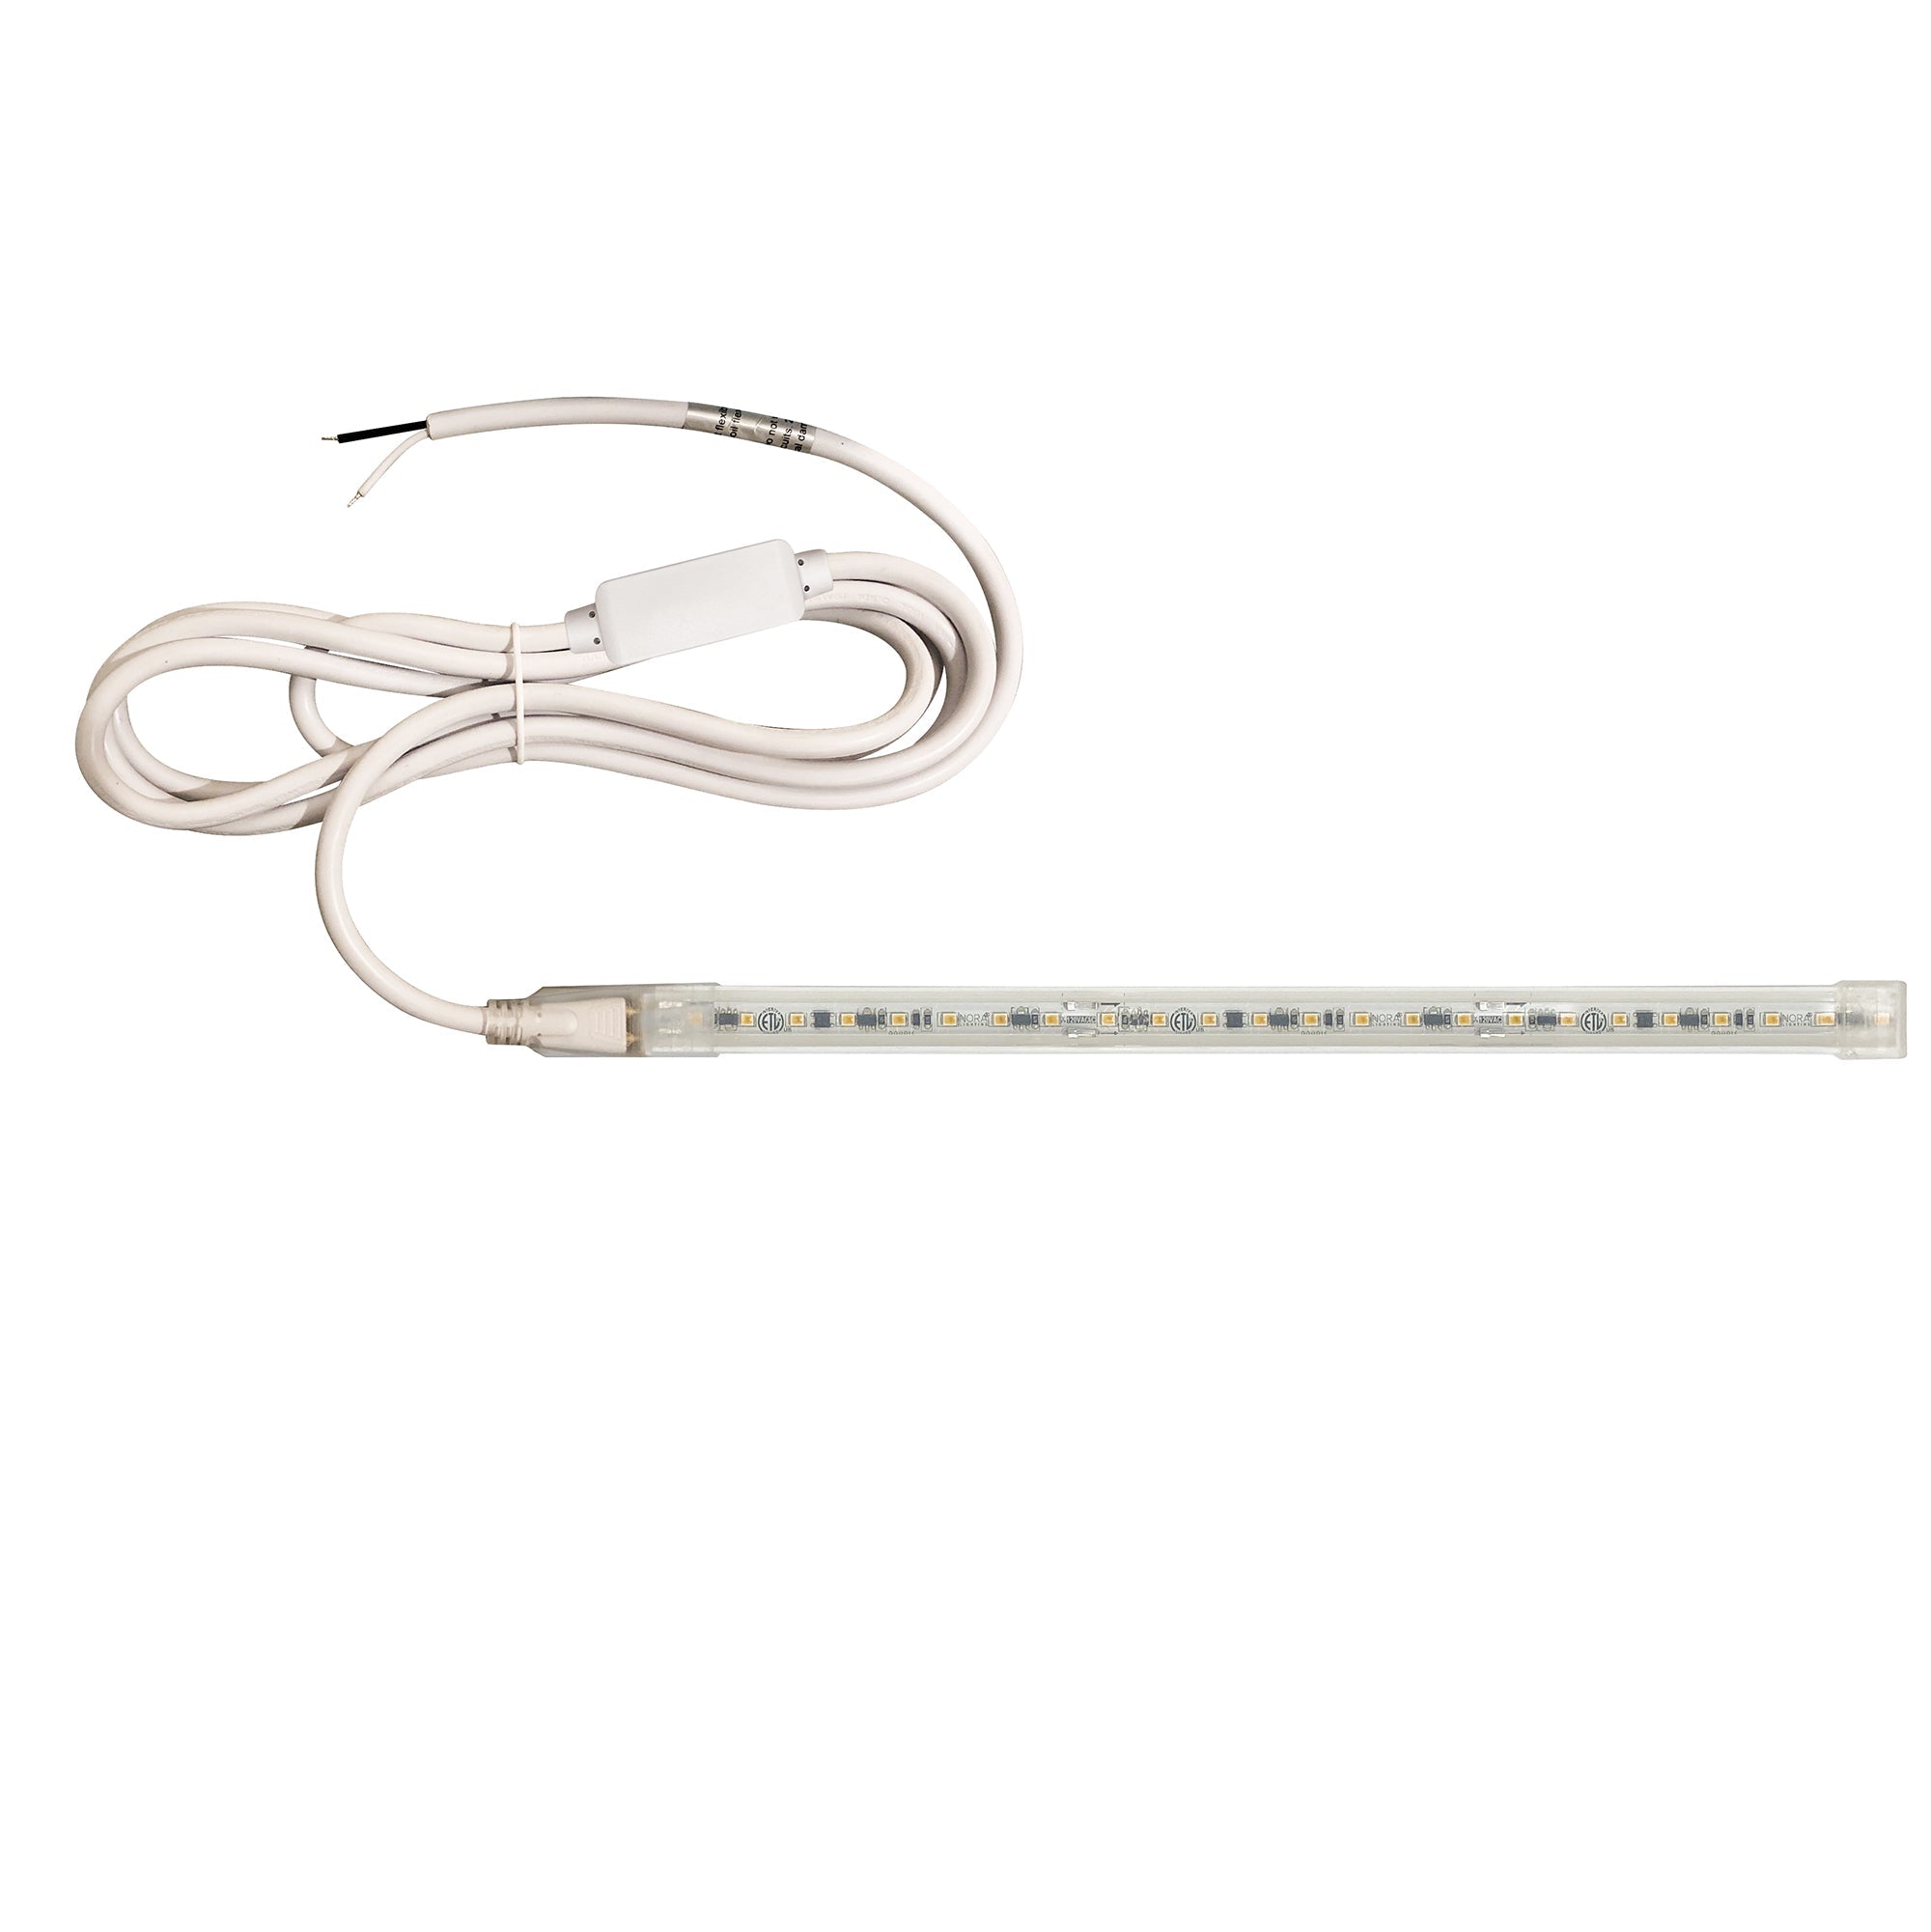 Nora Lighting NUTP13-W75-12-930/HWSP - Accent / Undercabinet - Custom Cut 75-ft 120V Continuous LED Tape Light, 330lm / 3.6W per foot, 3000K, w/ Mounting Clips and 8' Hardwired Power Cord w/ Surge Protector